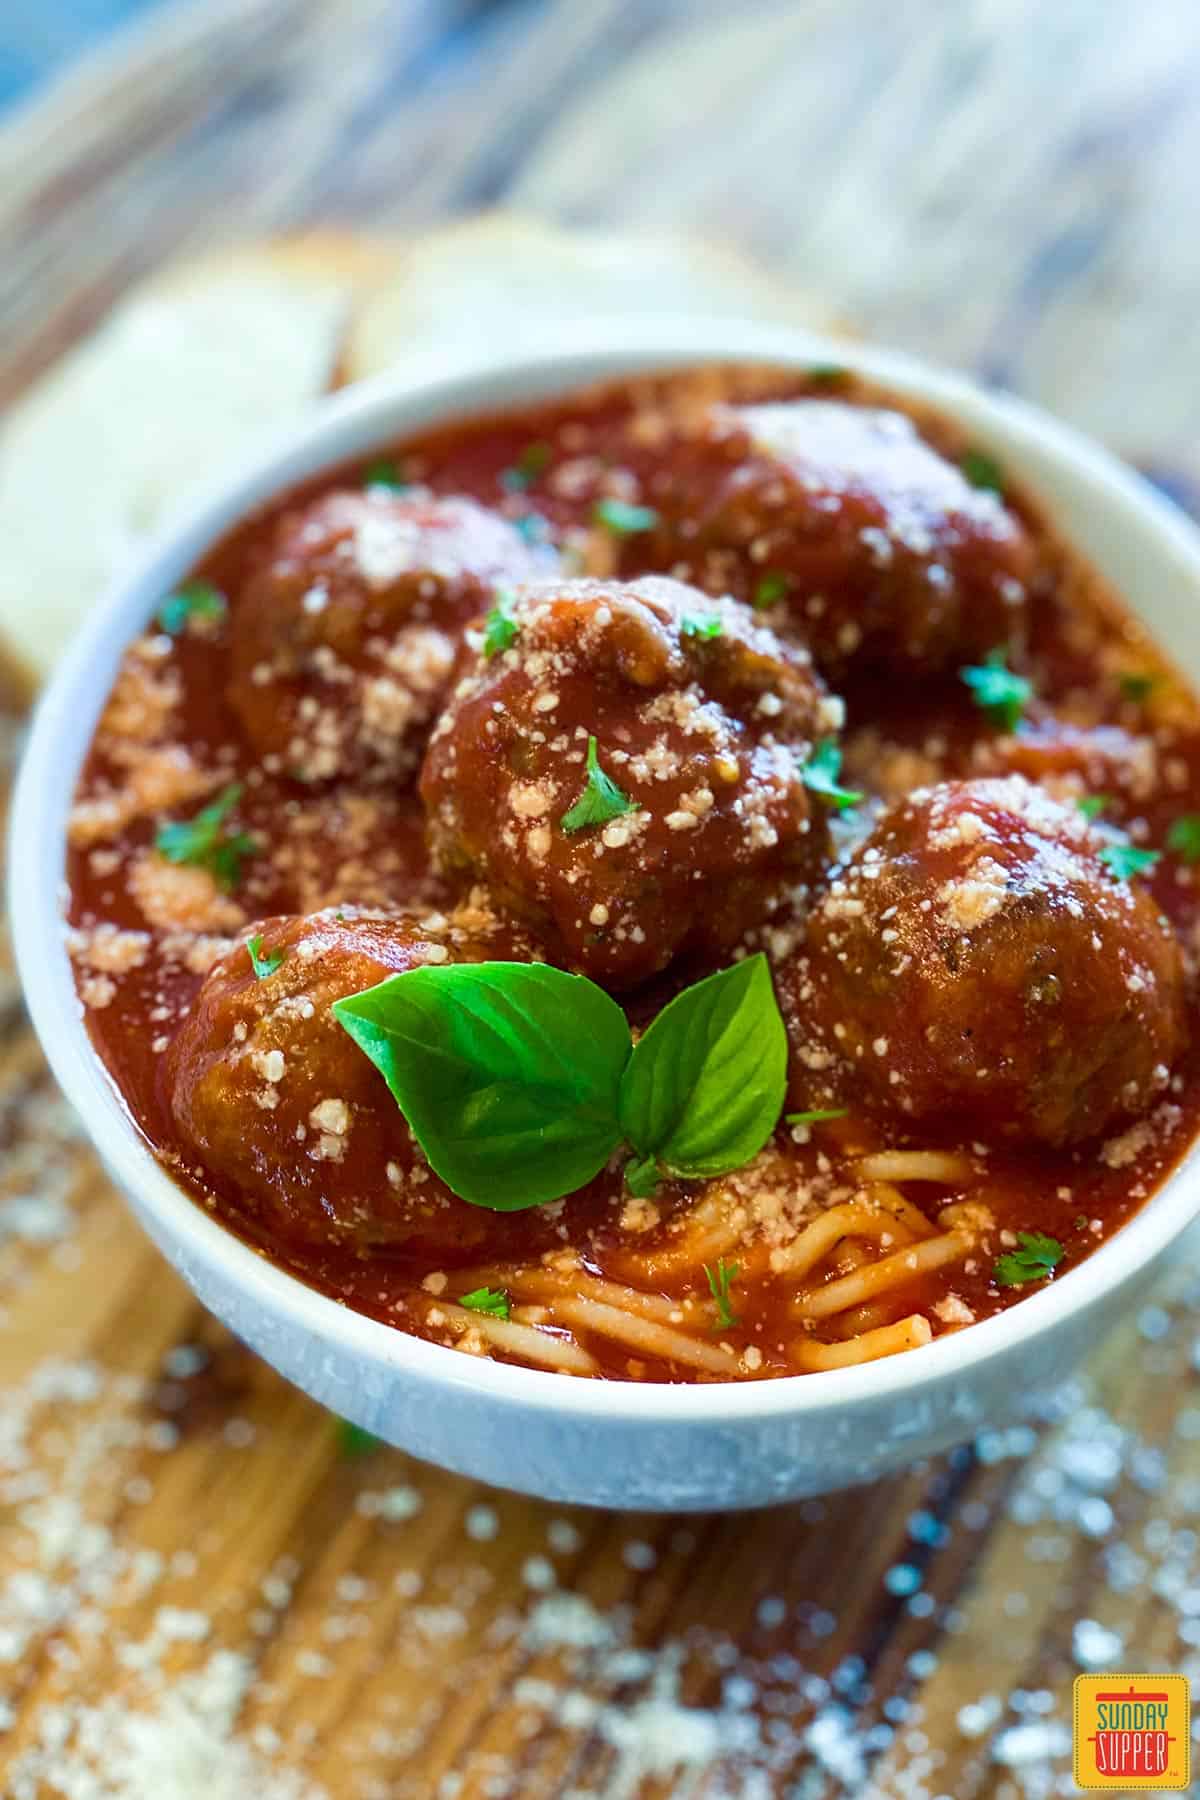 Sauce for meatballs over meatballs and spaghetti in a white bowl